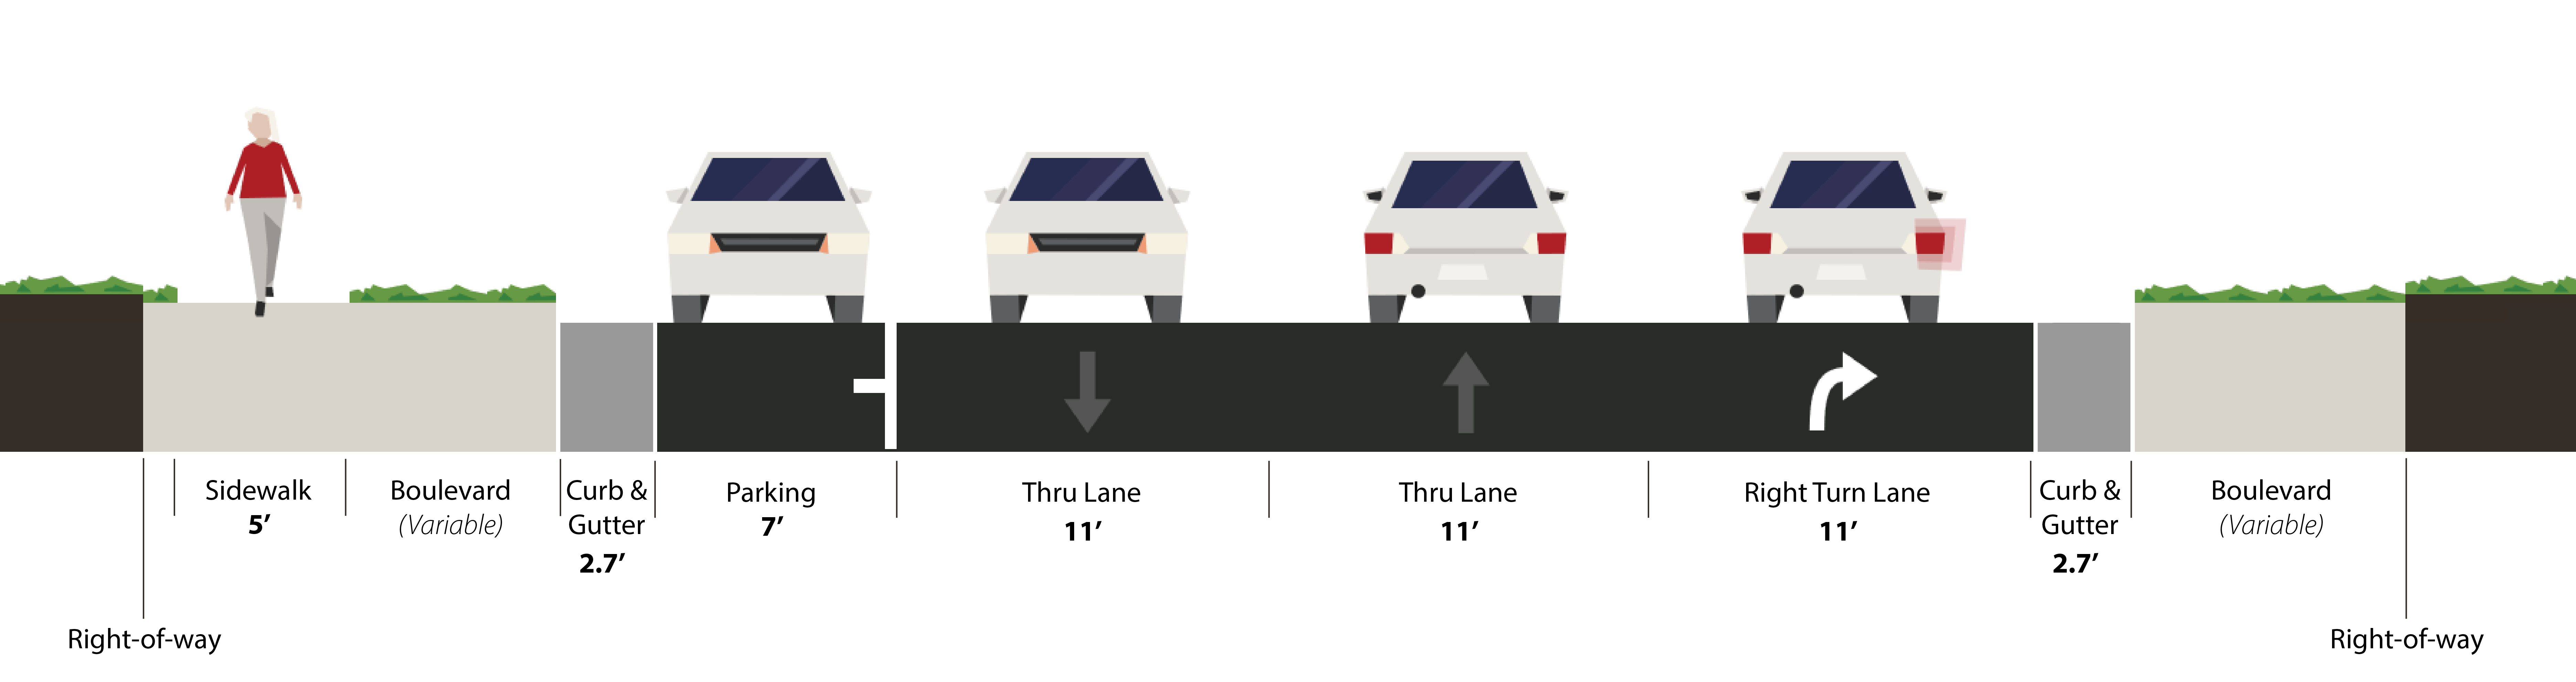 Option with parking and right turn lane: 5 foot sidewalk, variable width boulevard, 2.7 foot curb and gutter, 7 parking, 11 foot thru lane, 11 foot thru lane, 11 foot right turn lane, 2.7 foot curb and gutter, variable width boulevard.